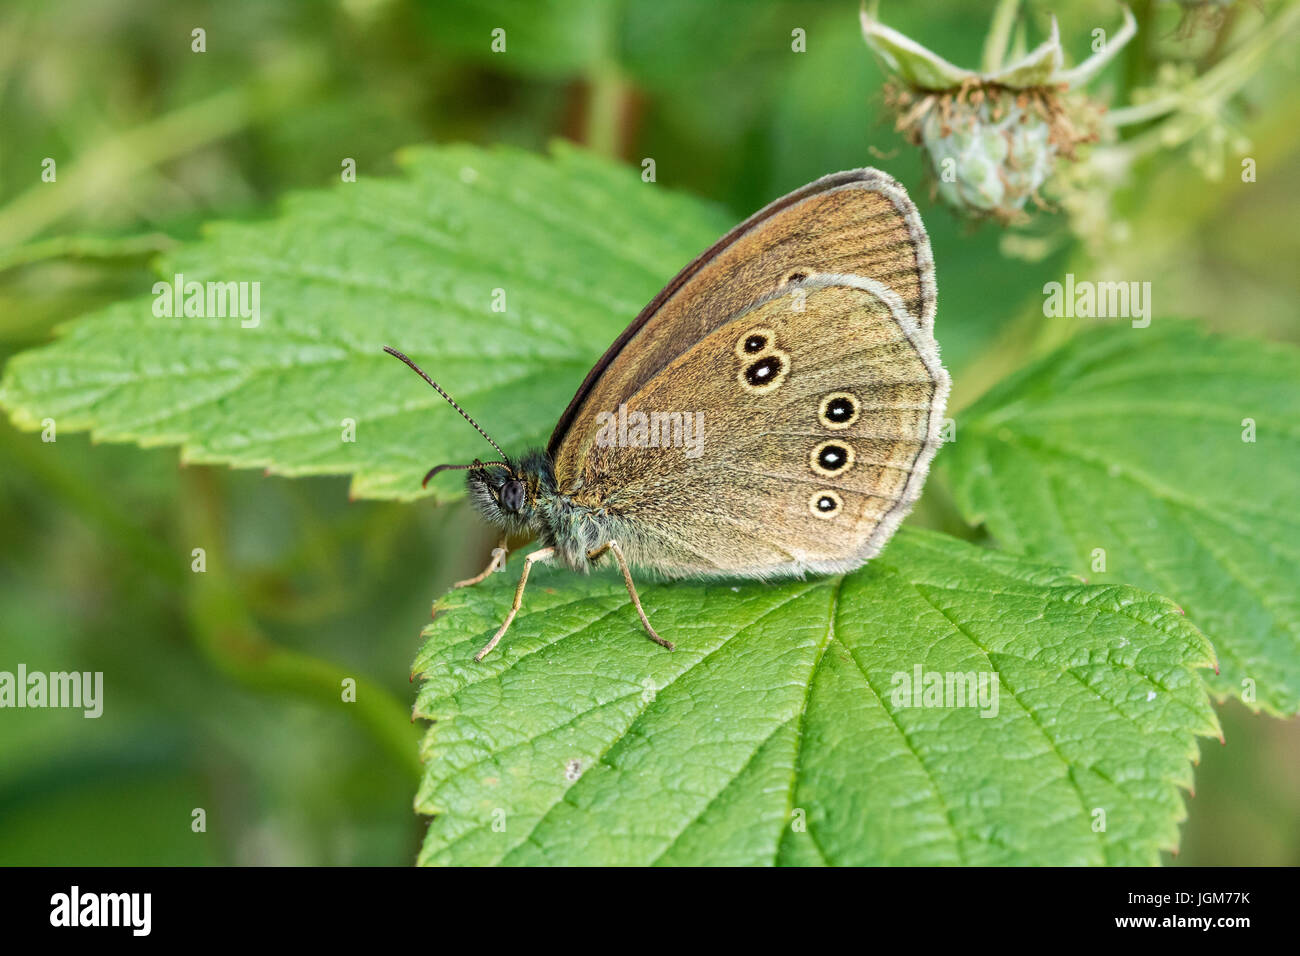 Resting butterfly Stock Photo